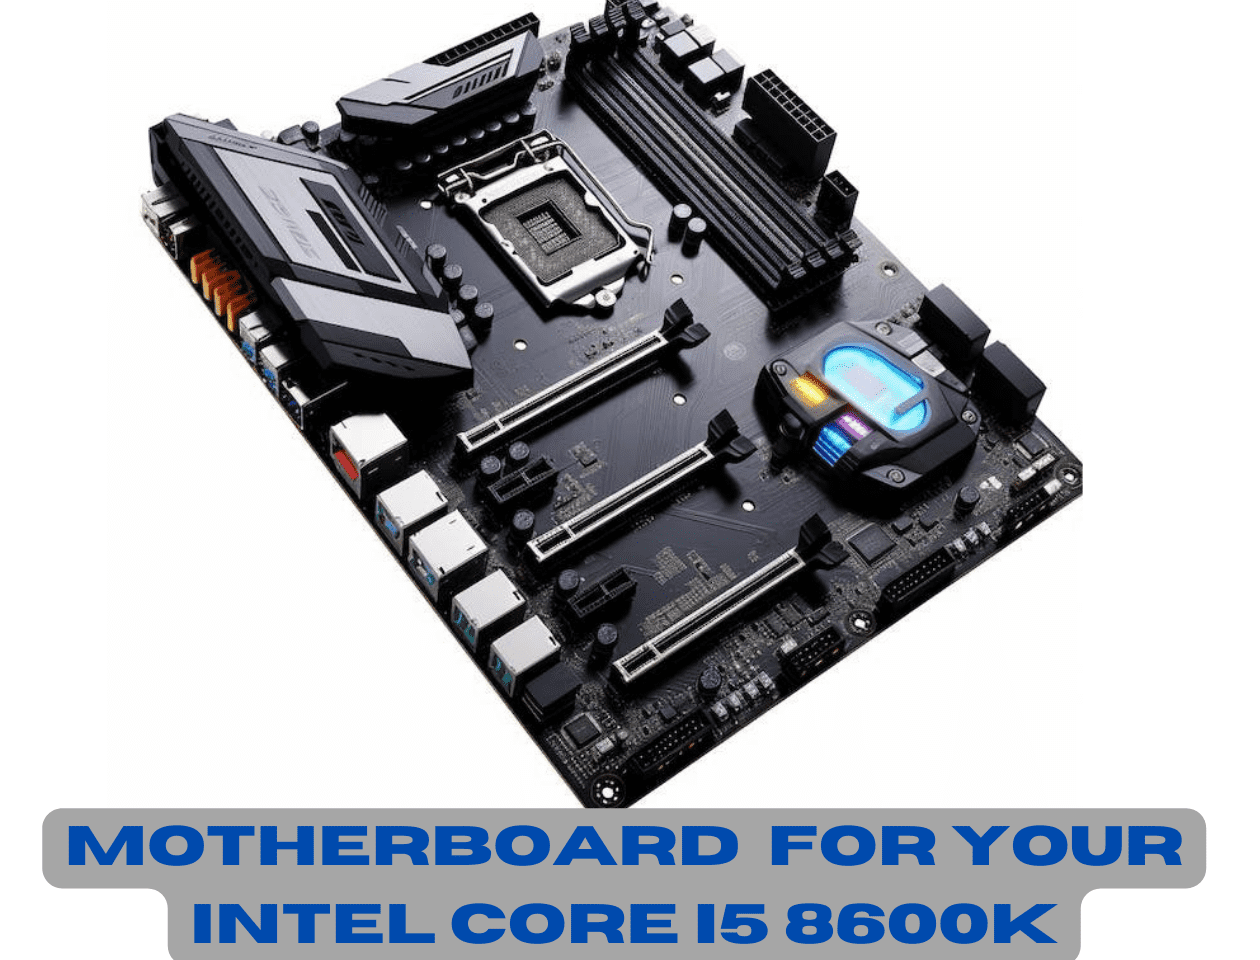 Ideal For Your Intel Corei5 8600K